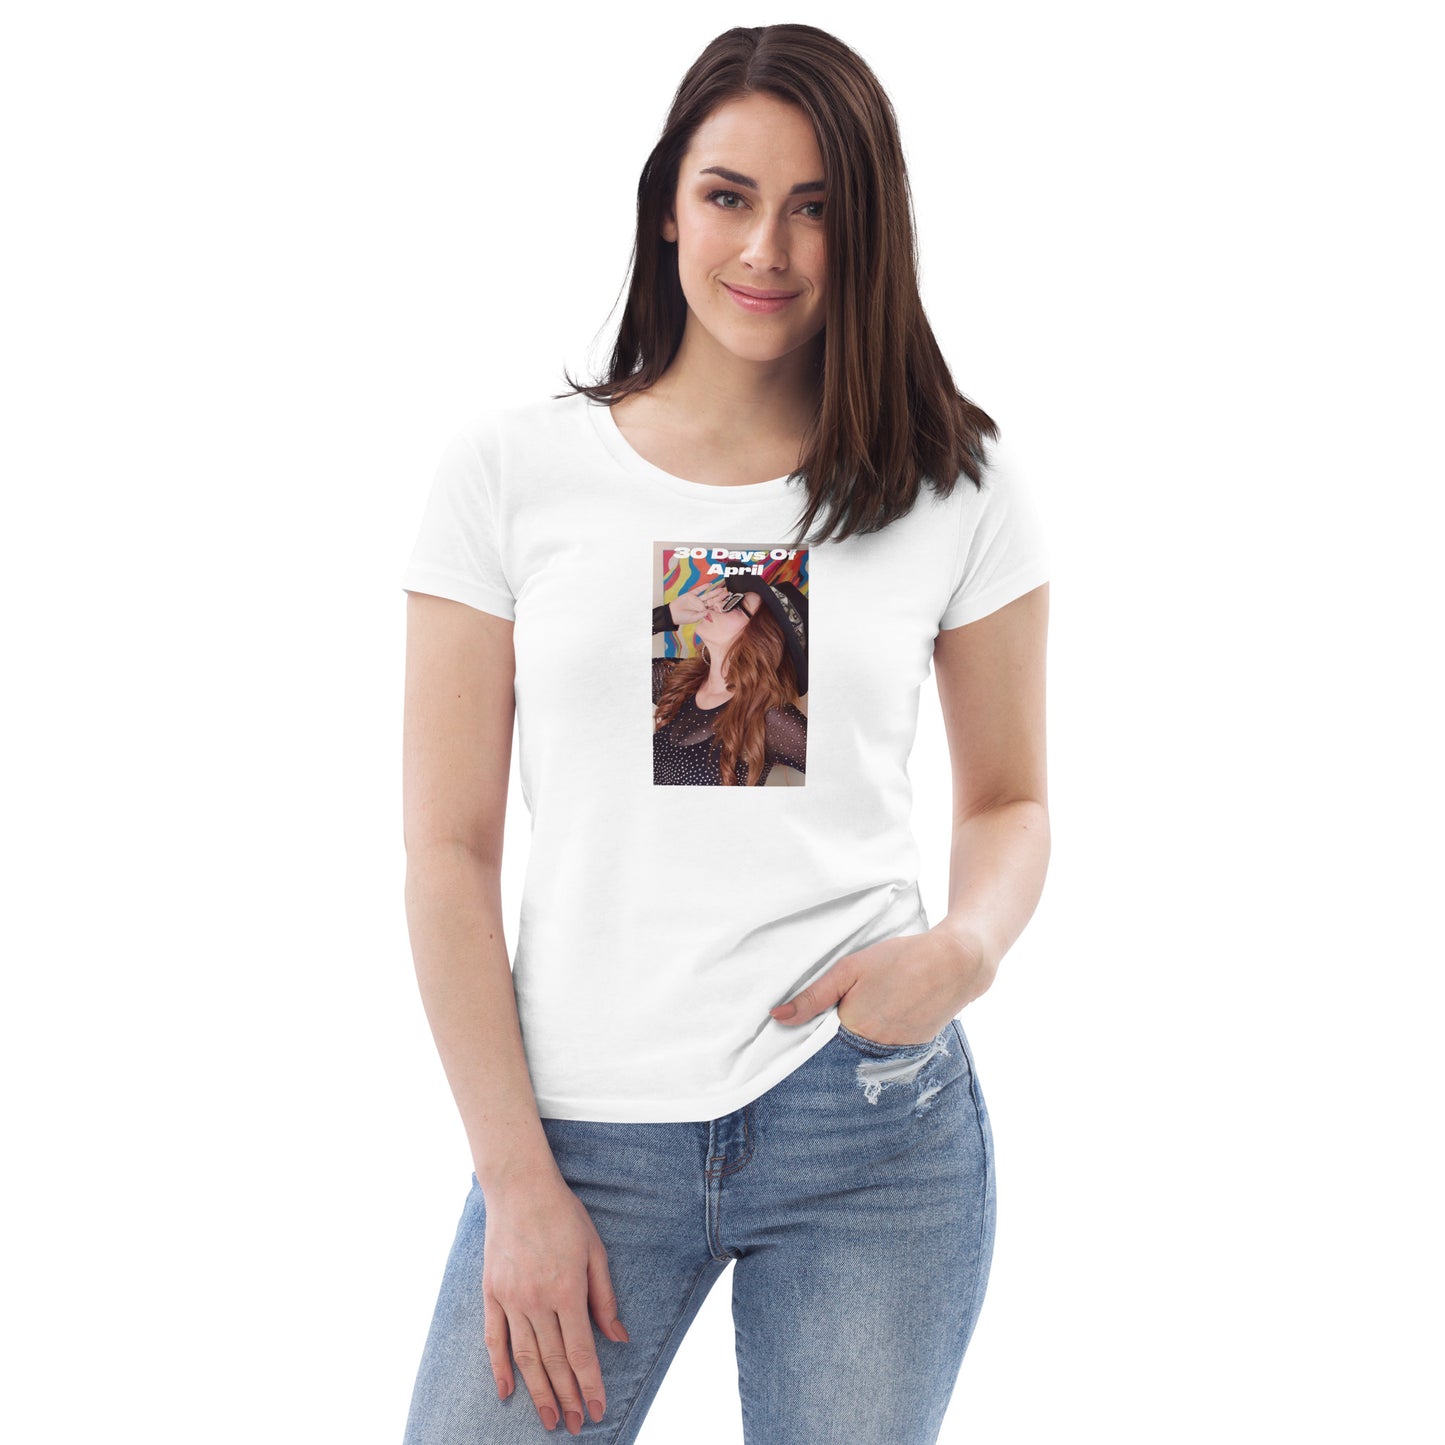 30 Days of April Women's fitted t-shirt